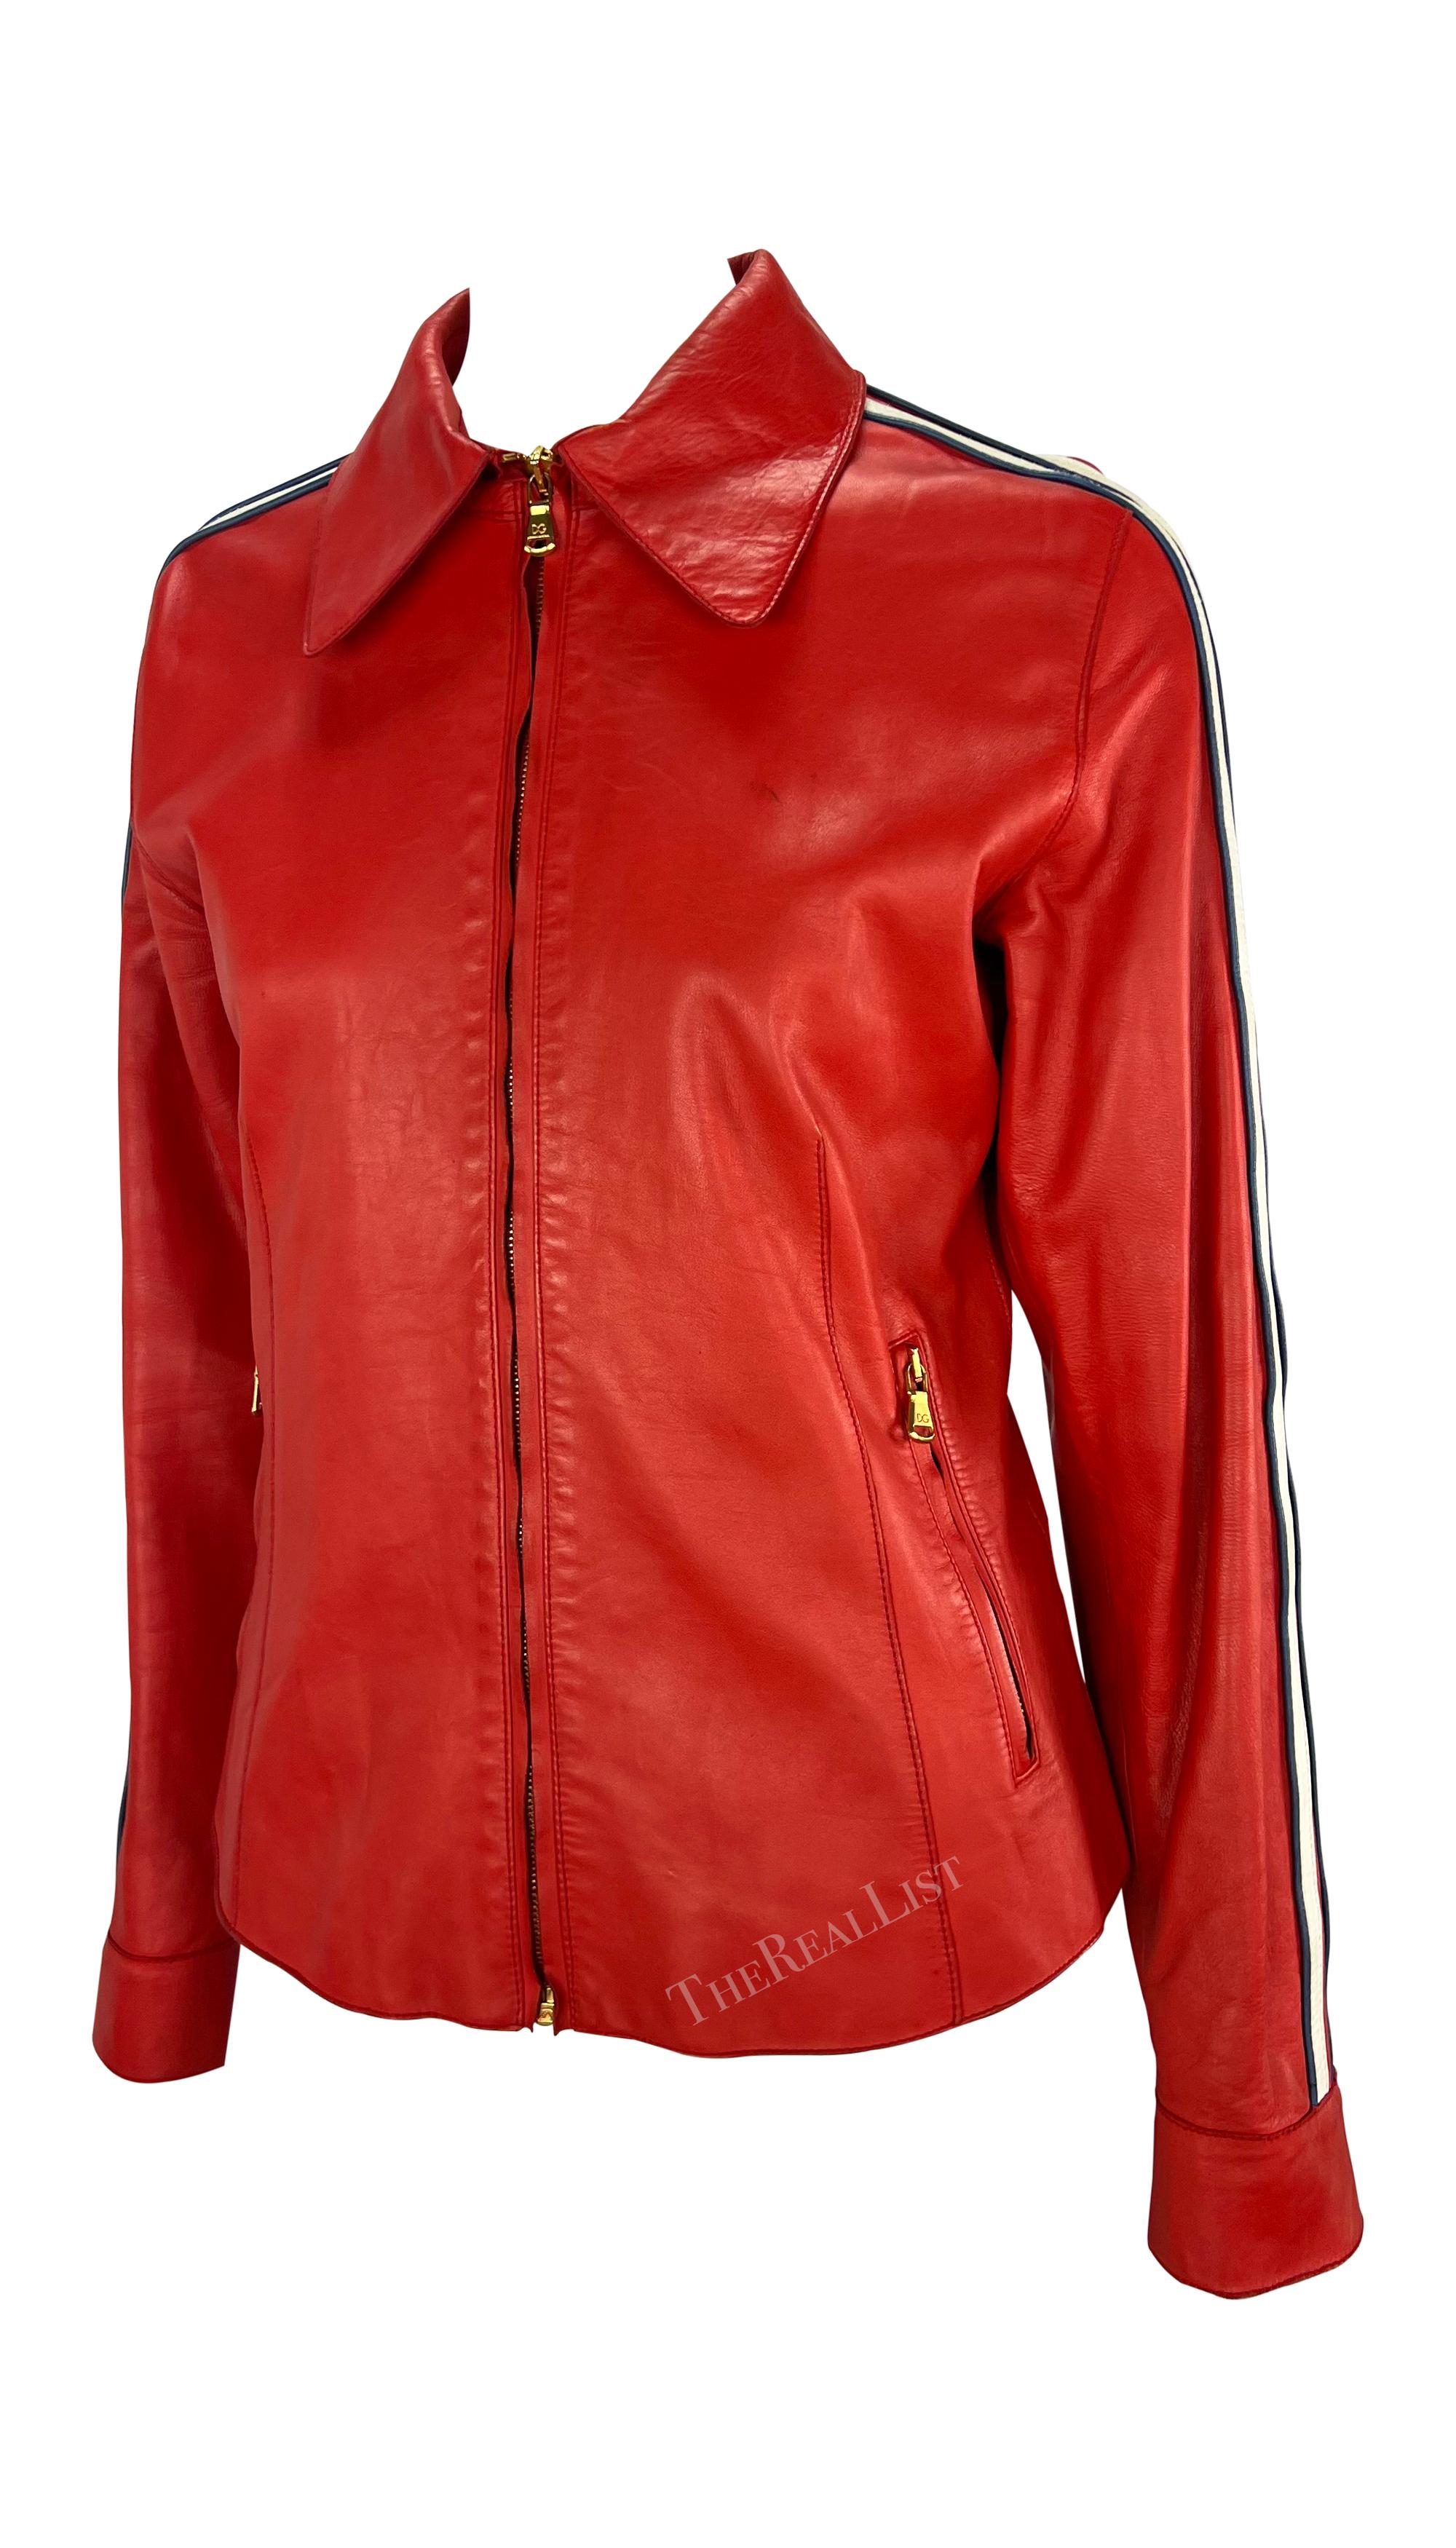 S/S 2001 Dolce & Gabbana Red Moto Style Leather Jacket For Sale 1